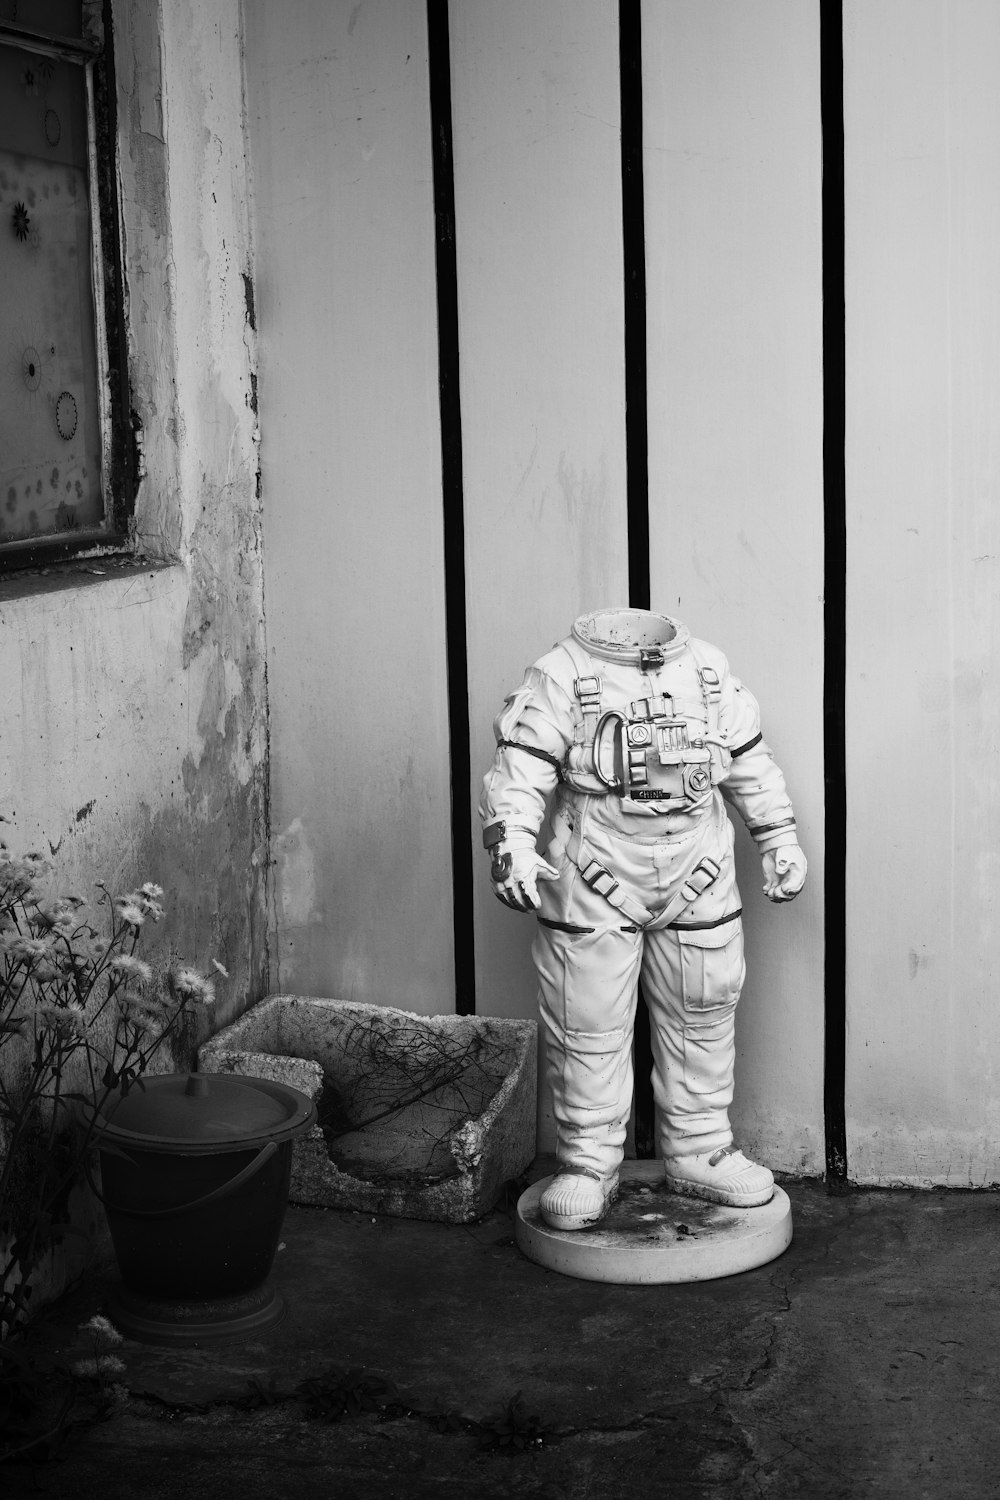 a black and white photo of a statue of an astronaut